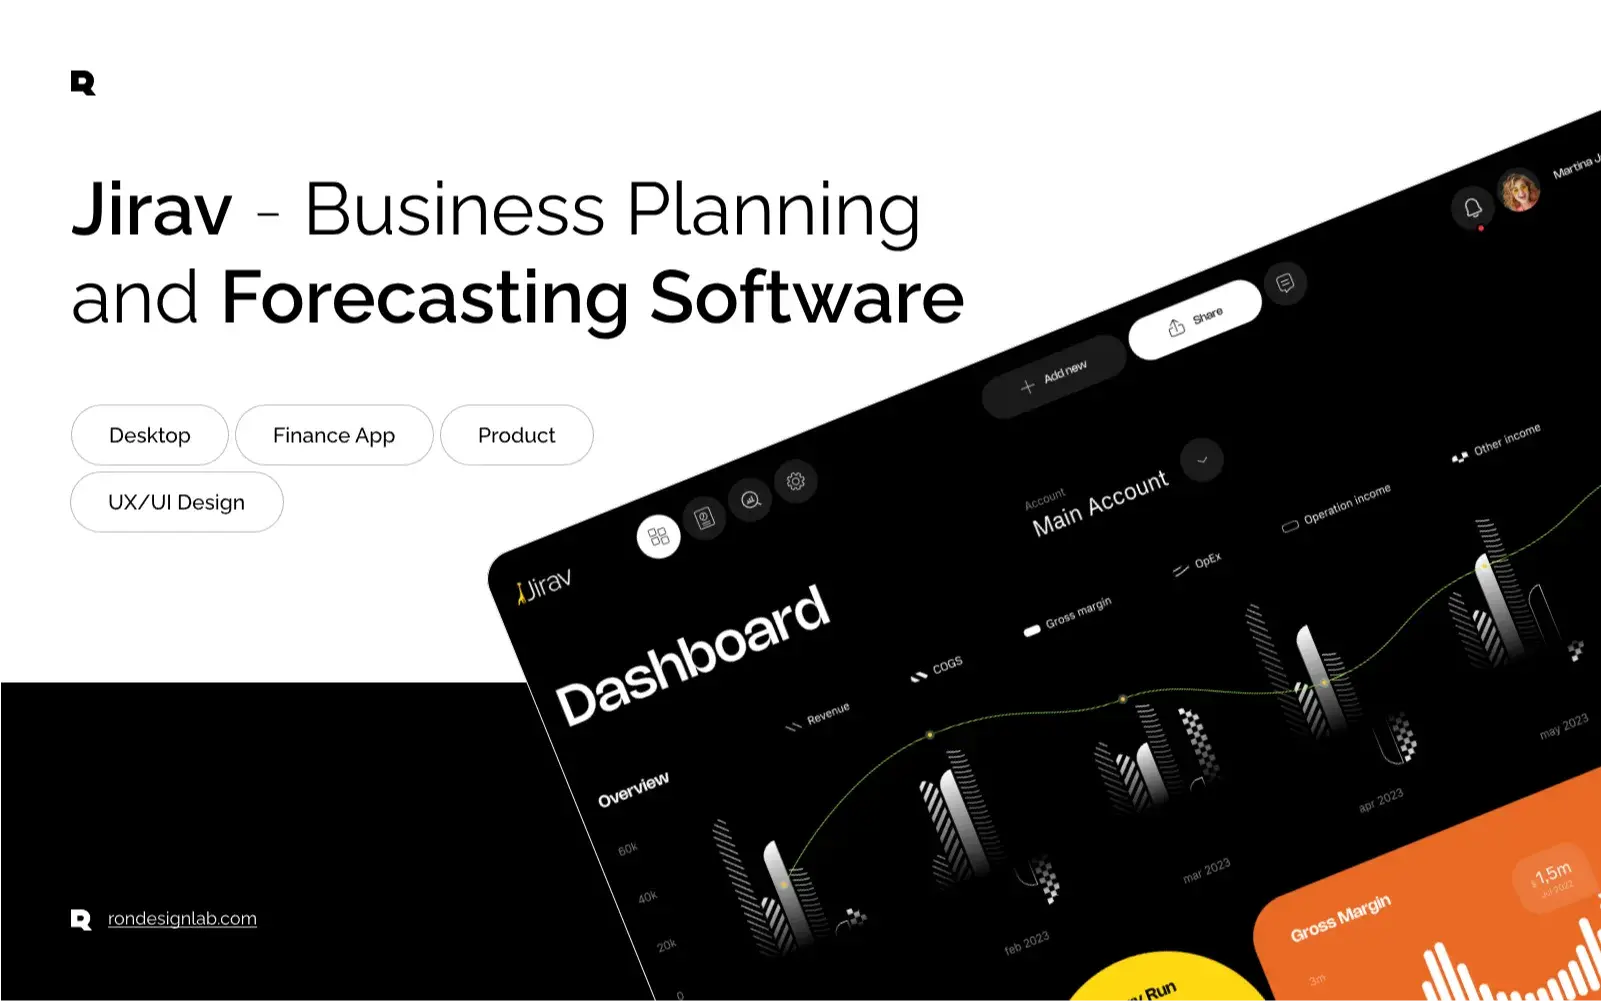 Jirav - Business Planning and Forecasting Software - Business